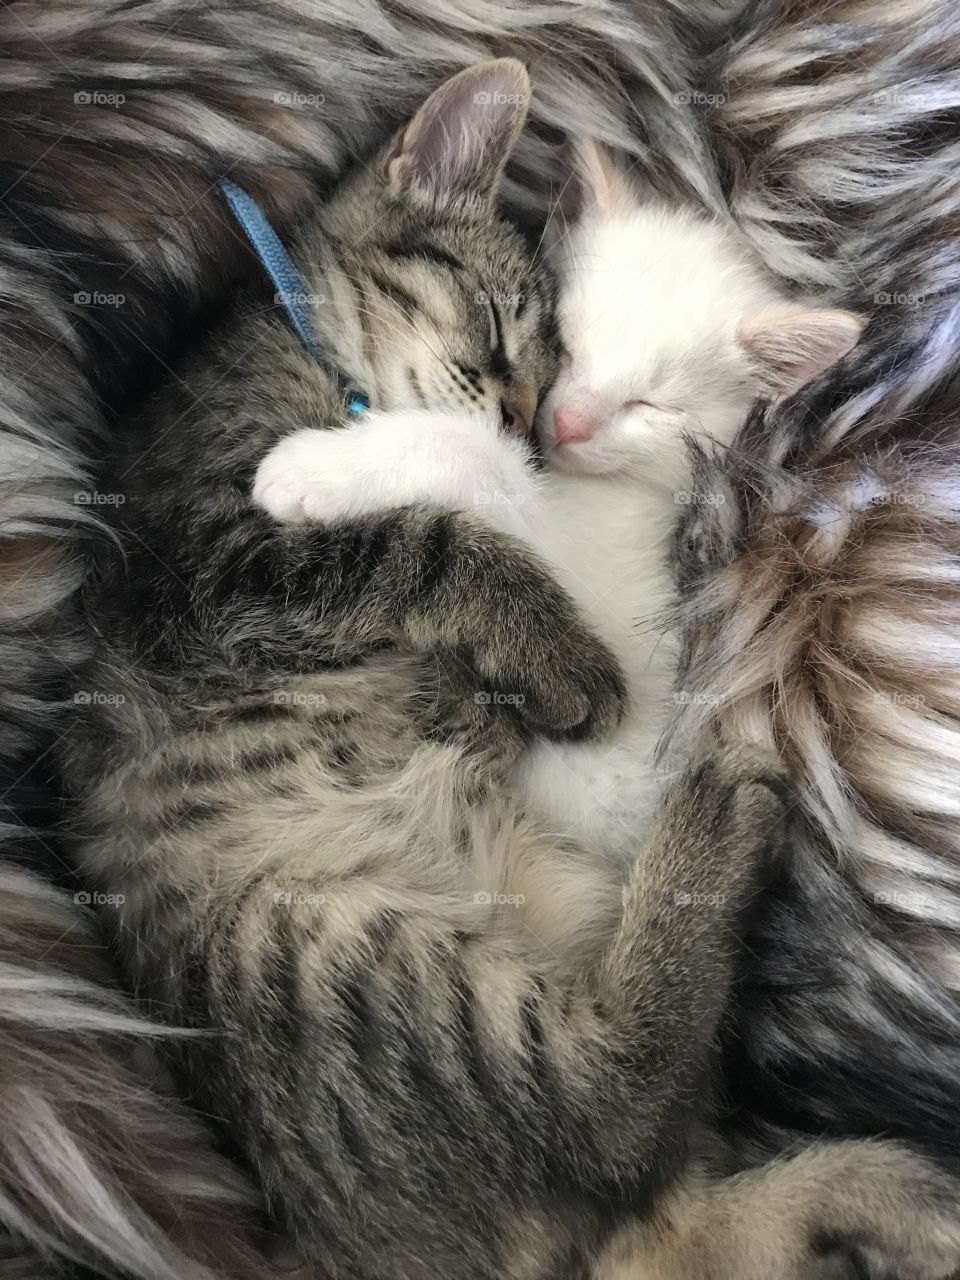 Adorable Baby Kittens Cuddling on a Furry Blanket